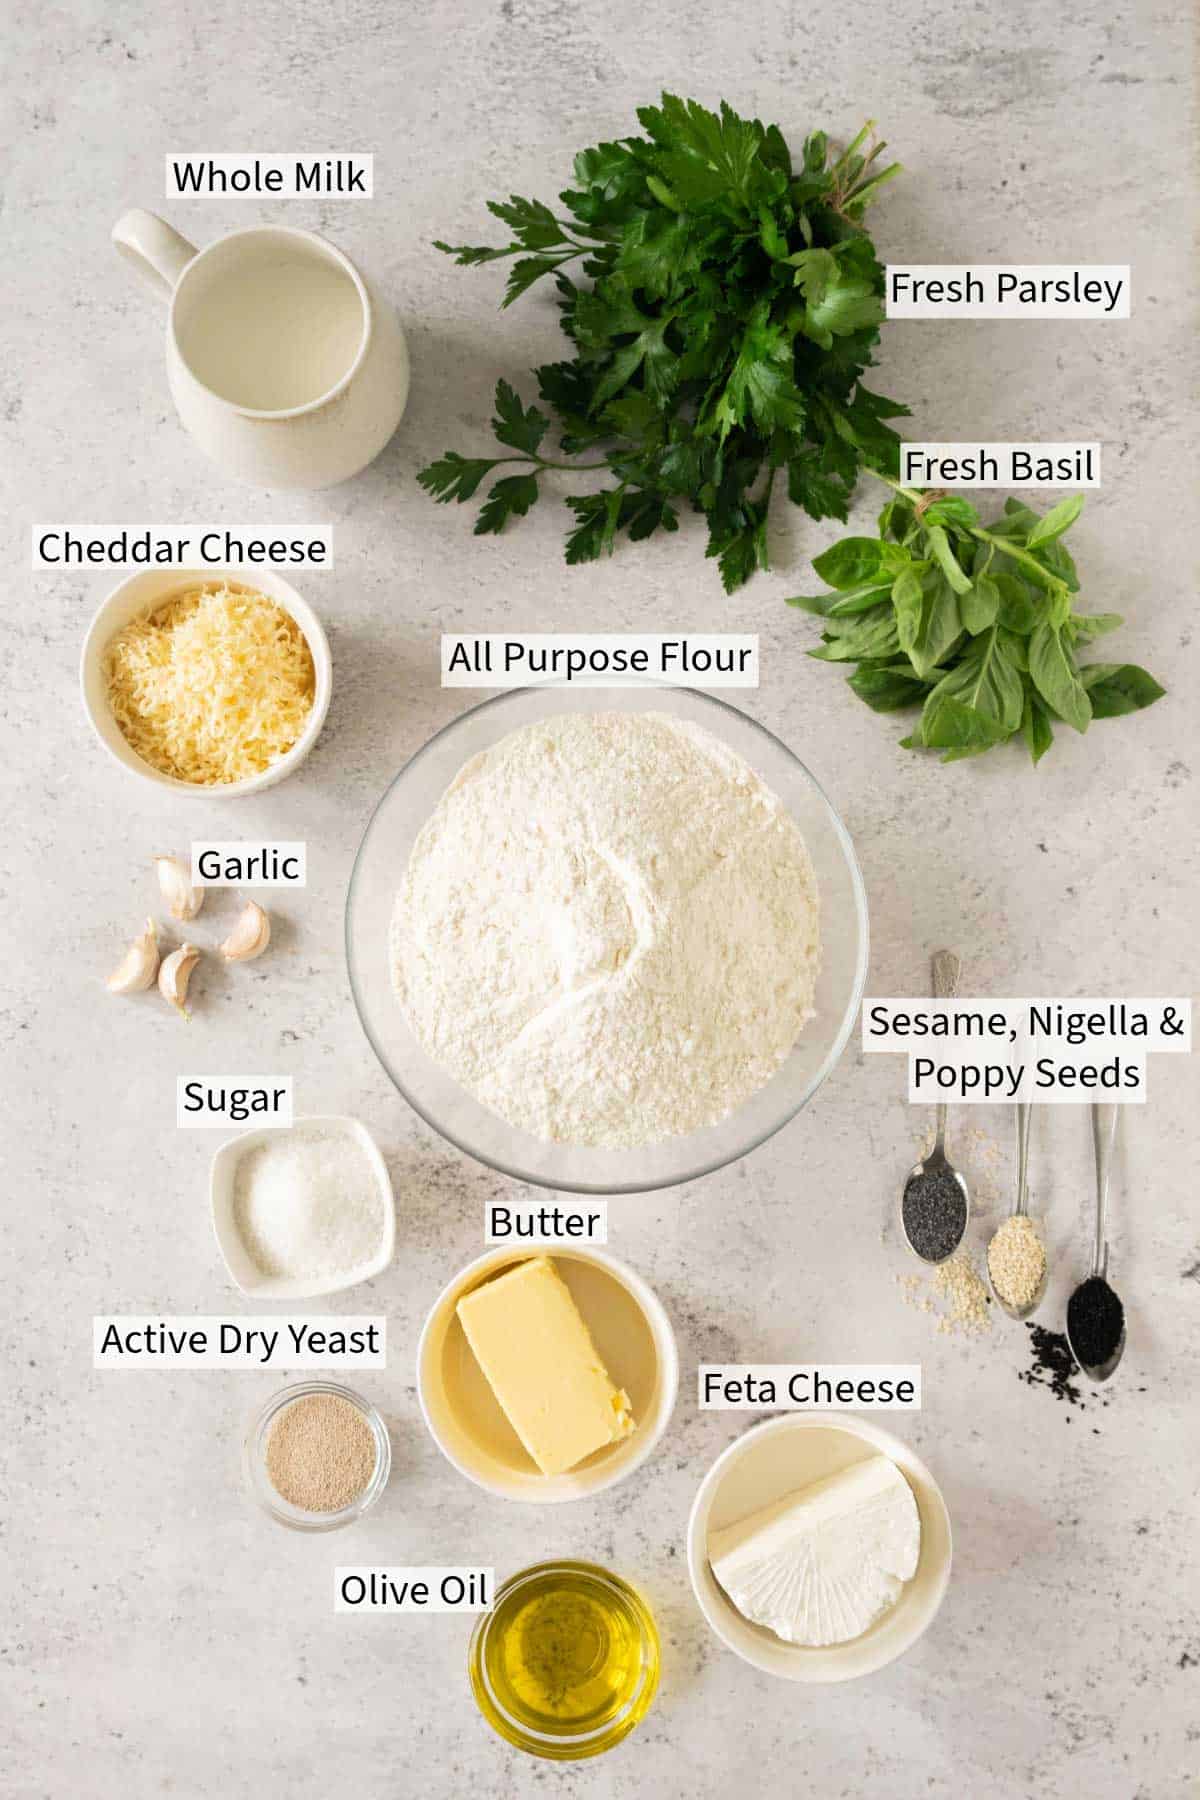 The ingredients for basil and feta cheese bread are shown on a white background.